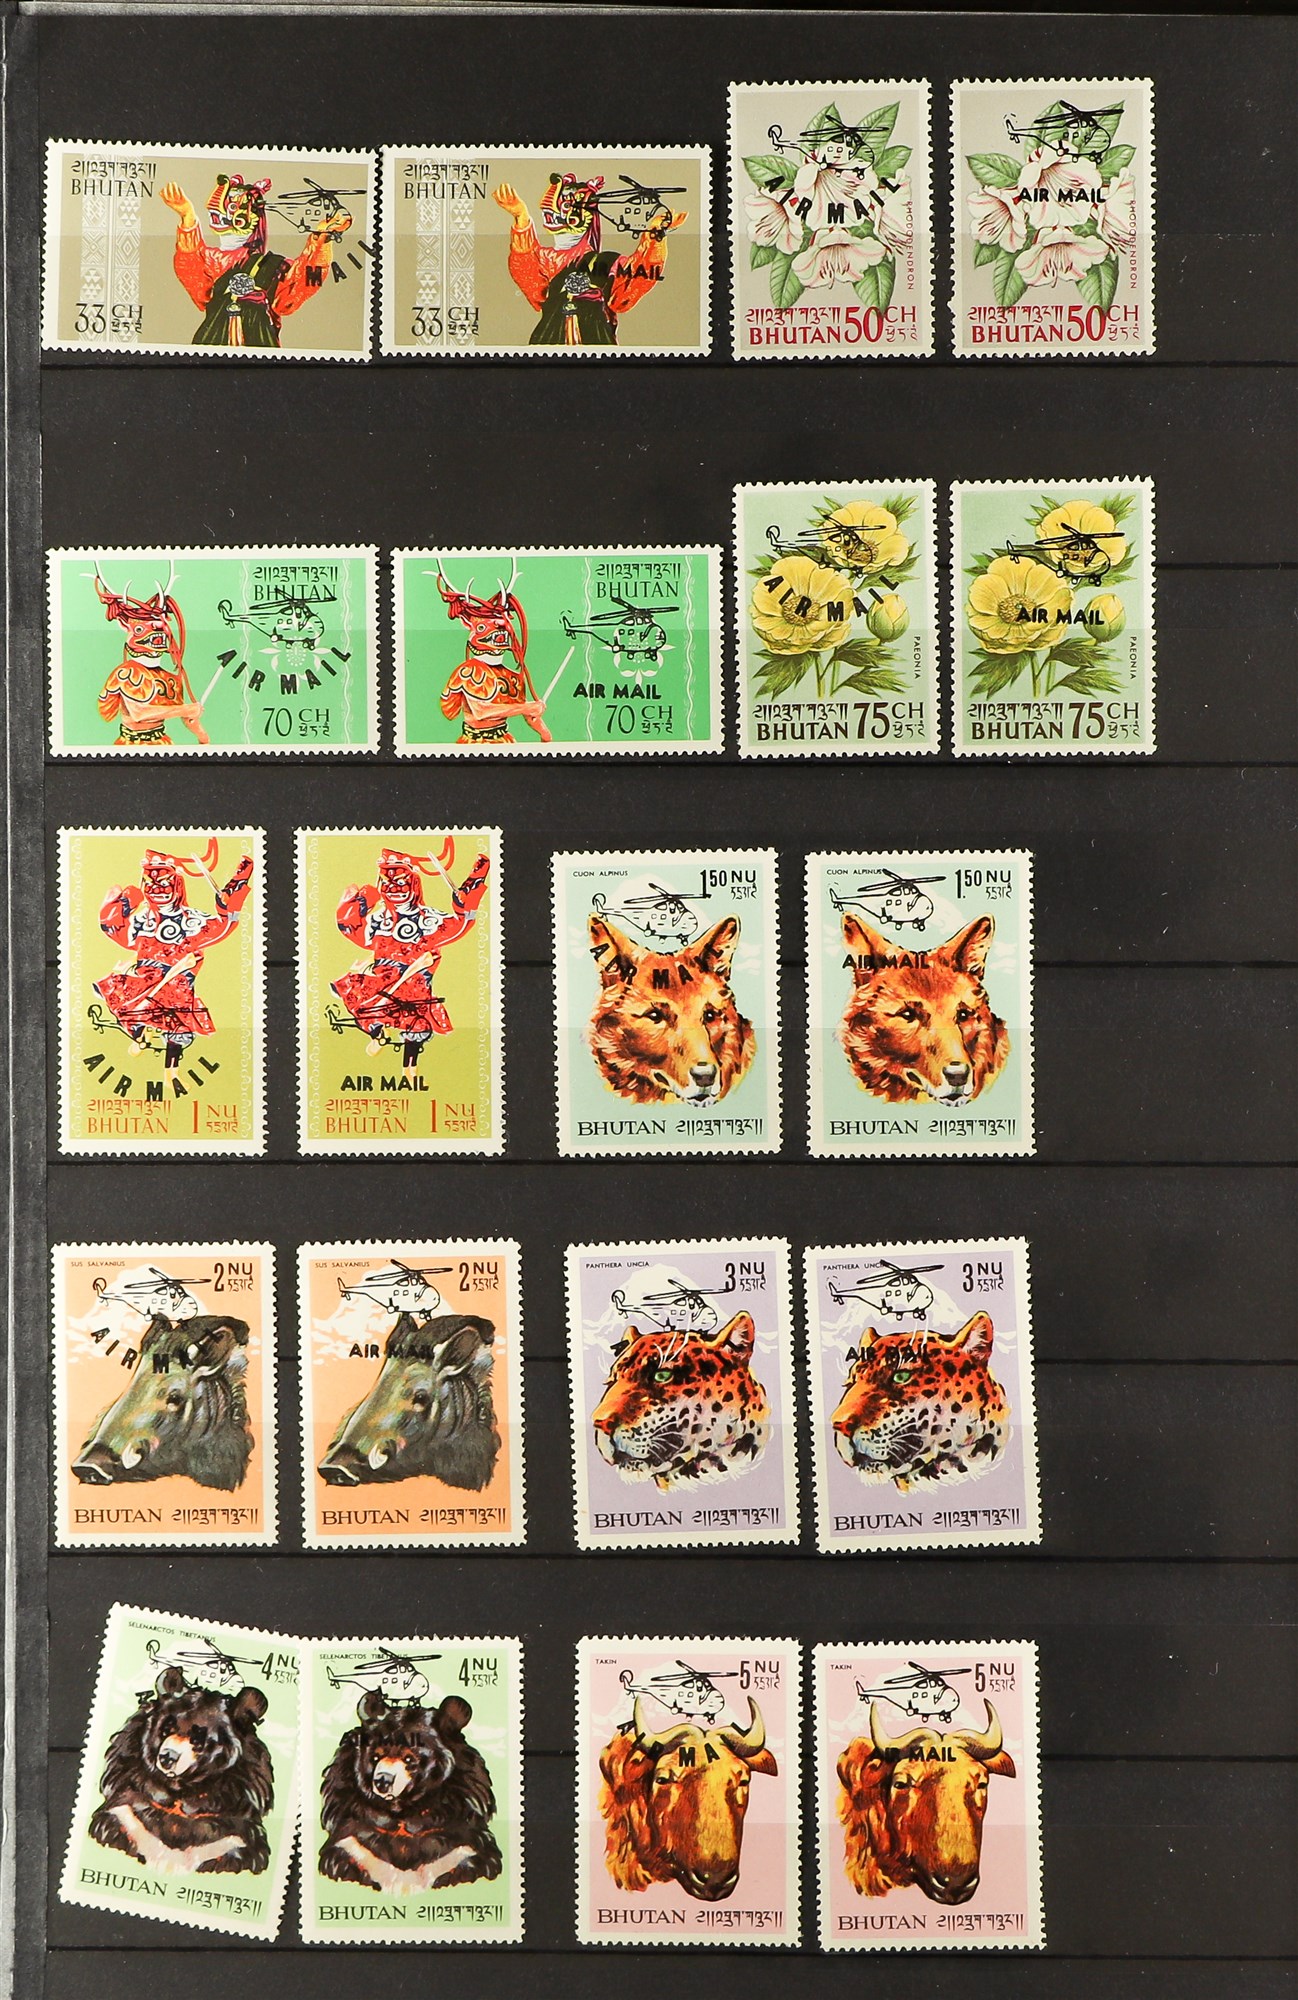 BHUTAN 1962 - 2001 COLLECTION of never hinged mint chiefly complete sets incl gold foil, embossed,